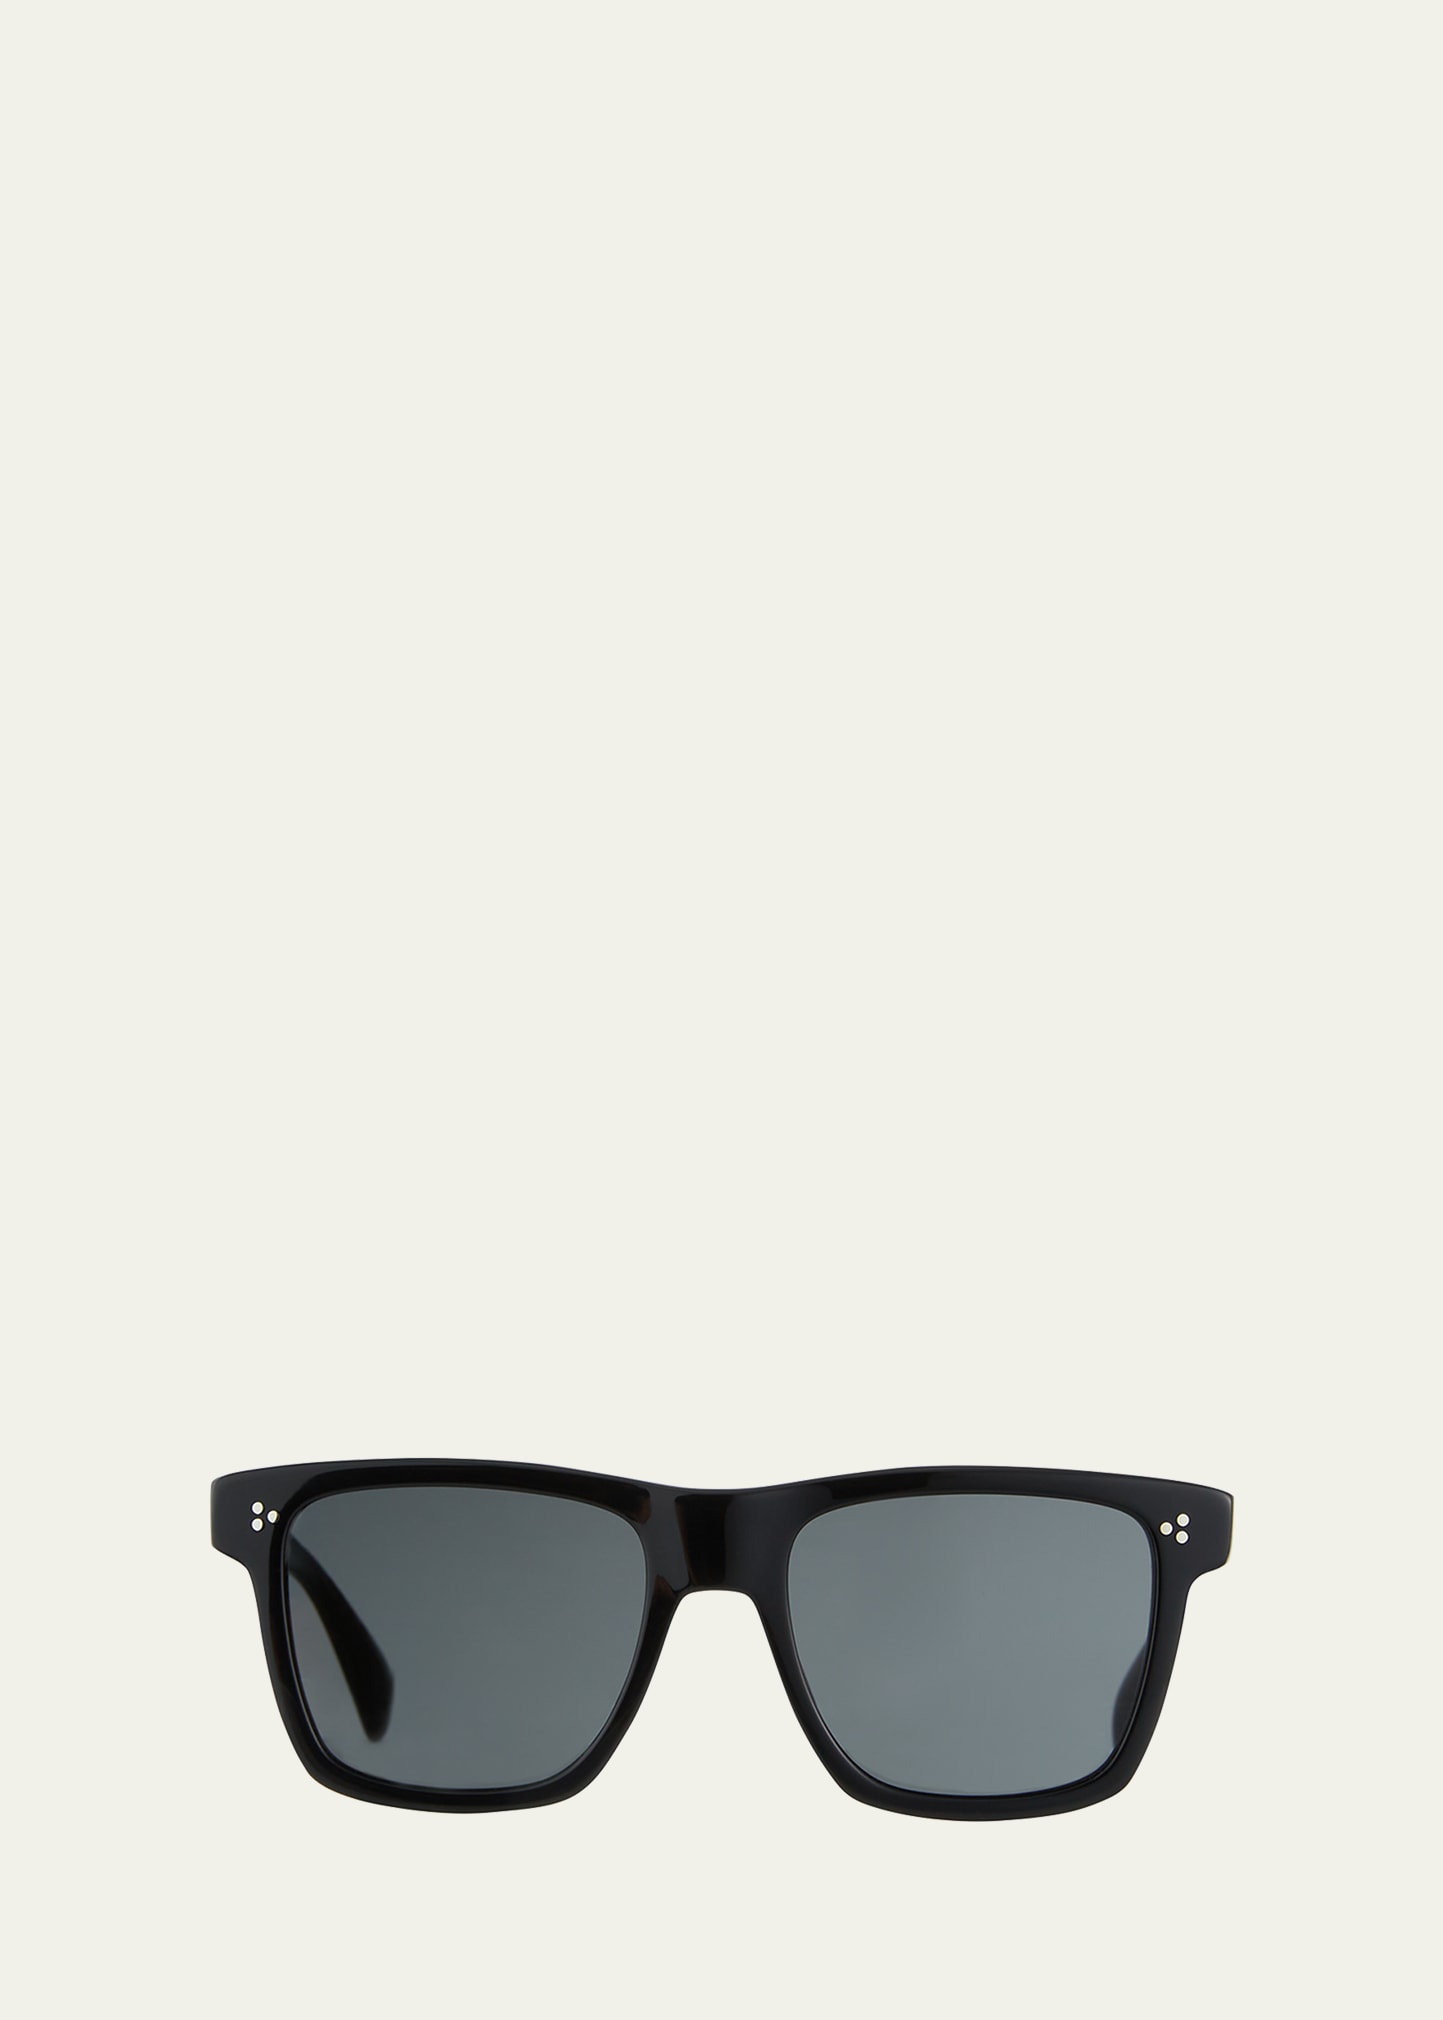 Oliver Peoples Men's Casian Acetate Rectangle Sunglasses In Black/gray